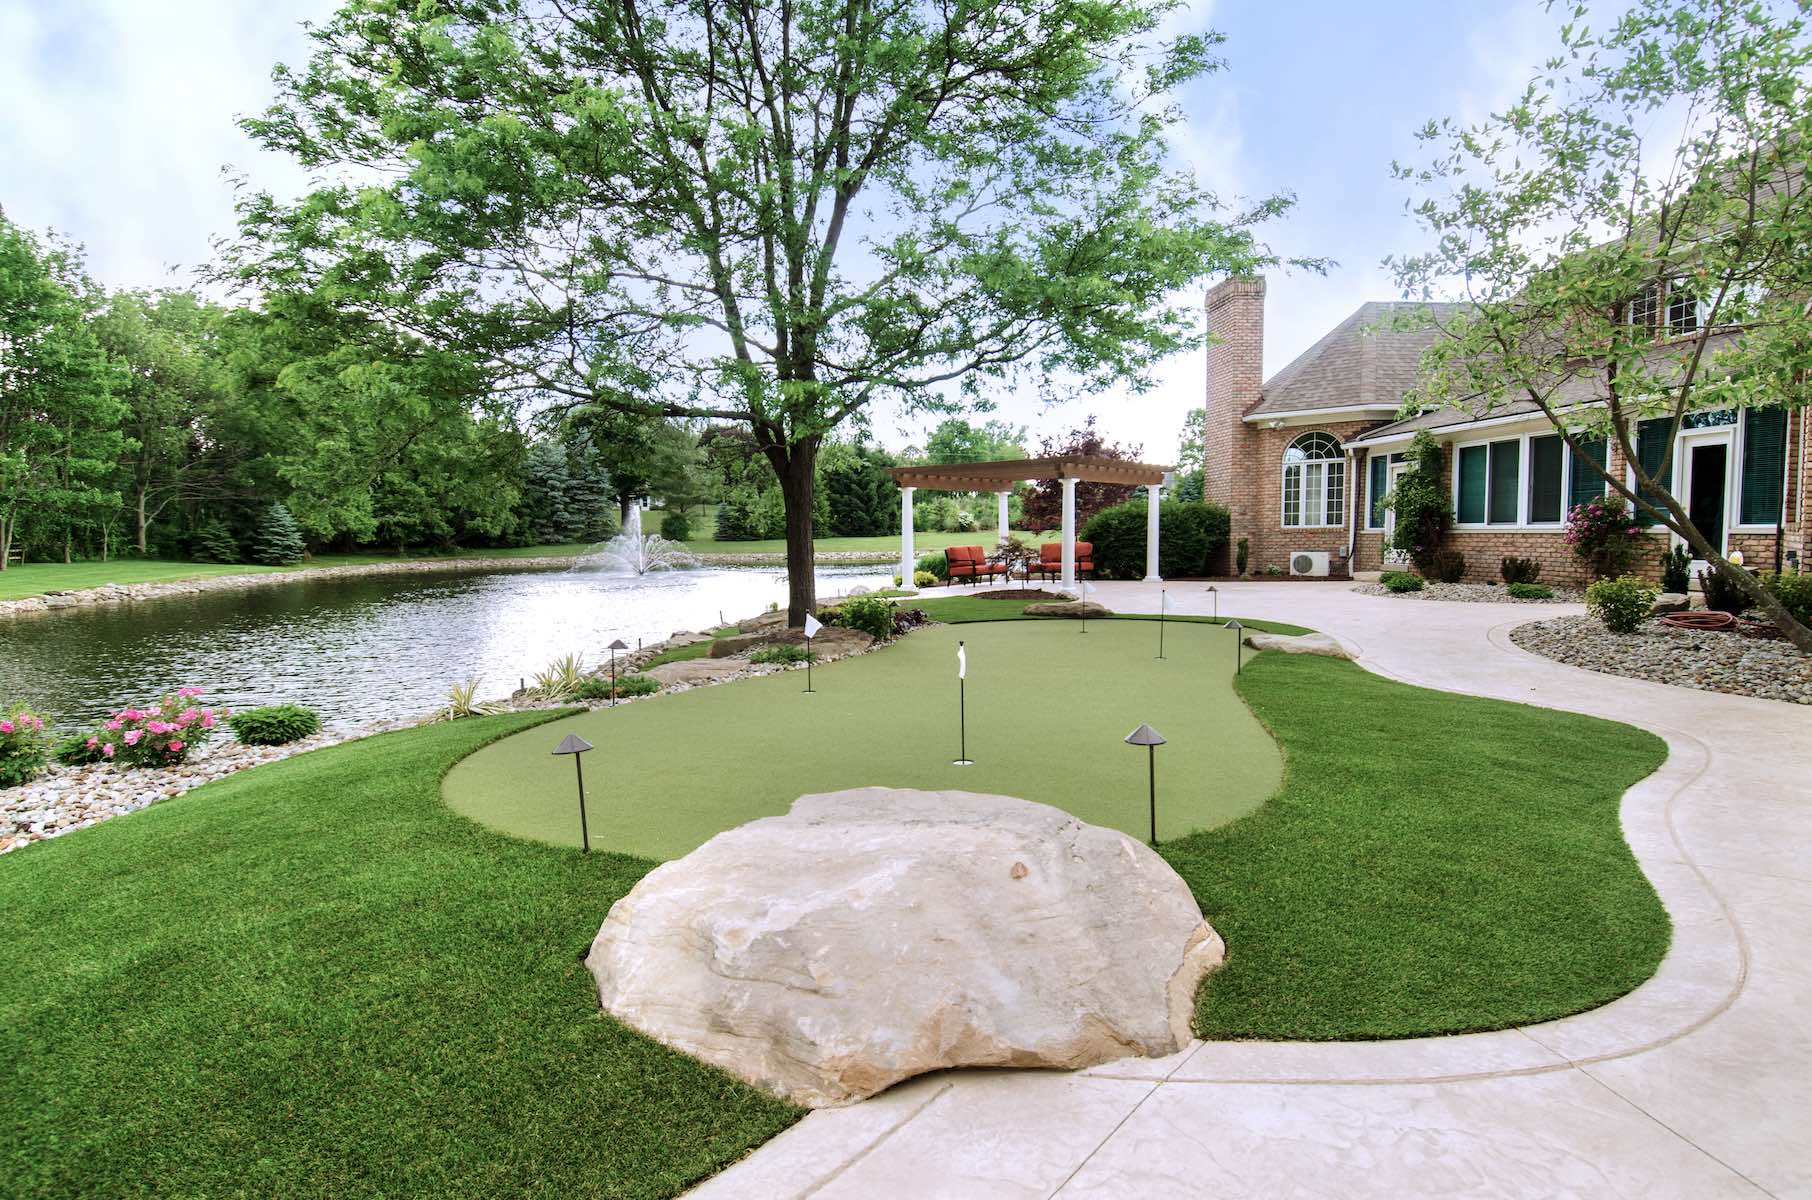 The photo shows a golf course putting green made of artificial turf, in front of a pond and fountain, near the entrance to a clubhouse.